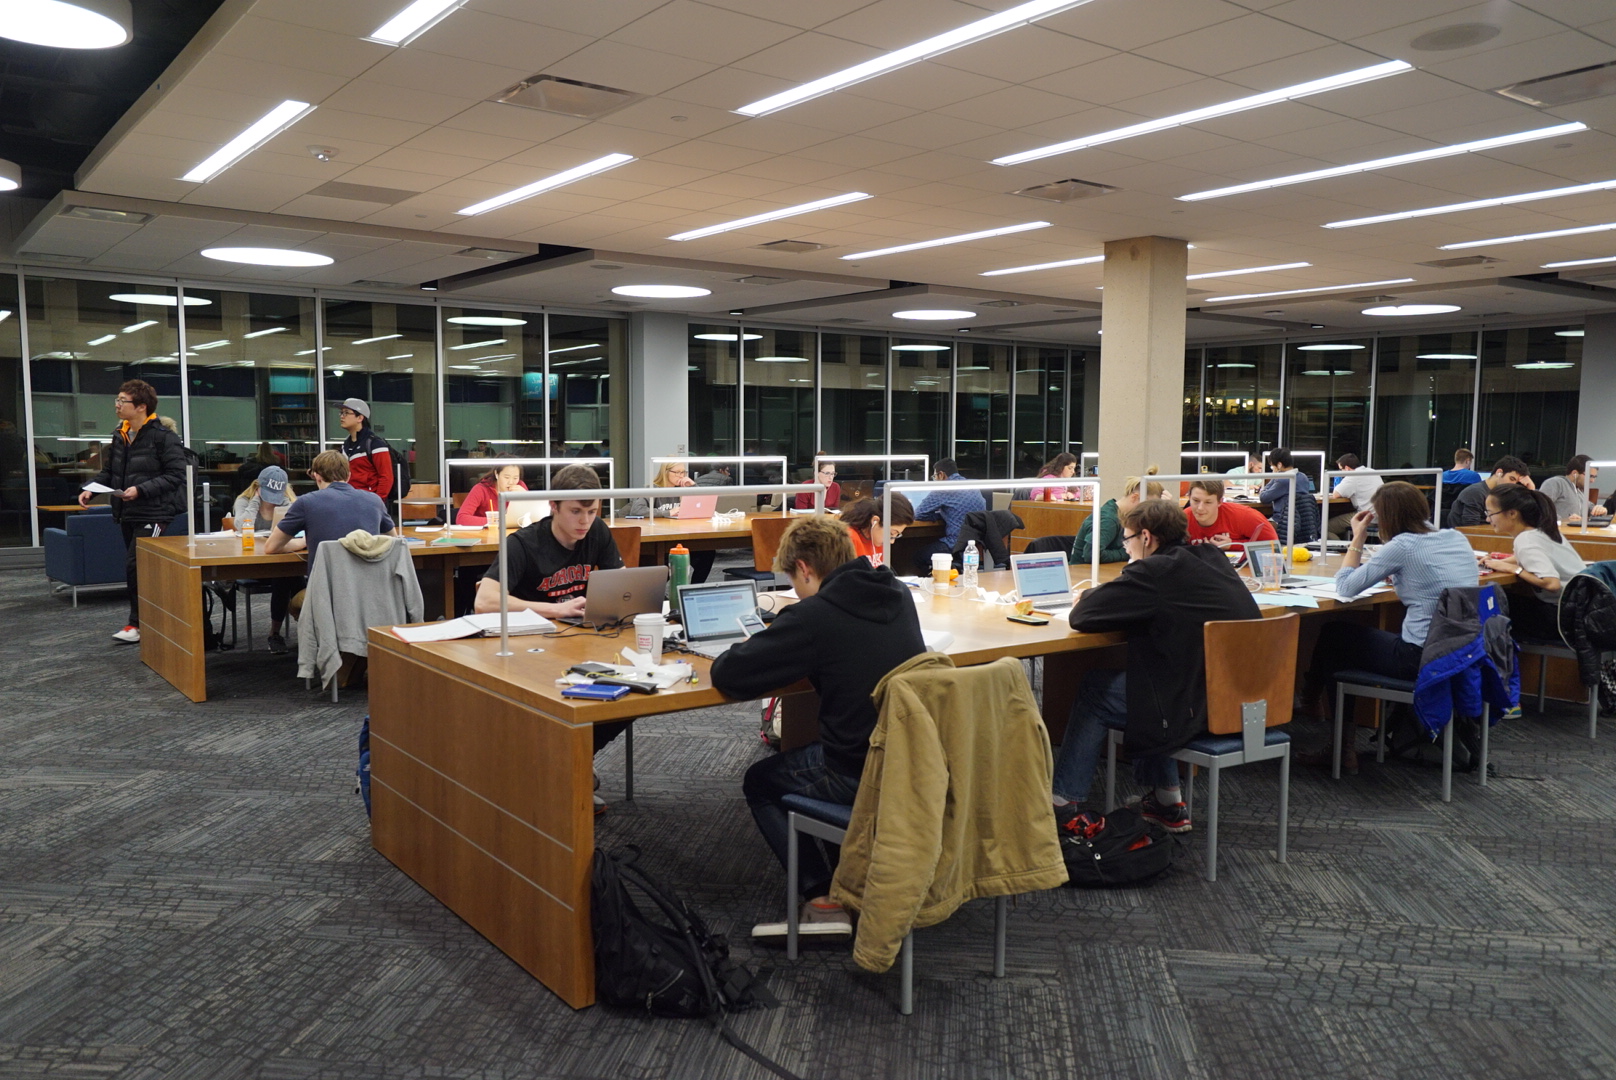 The Adele Hall Learning Commons opens 24-hours from May 1-12 giving students extra hours to study.